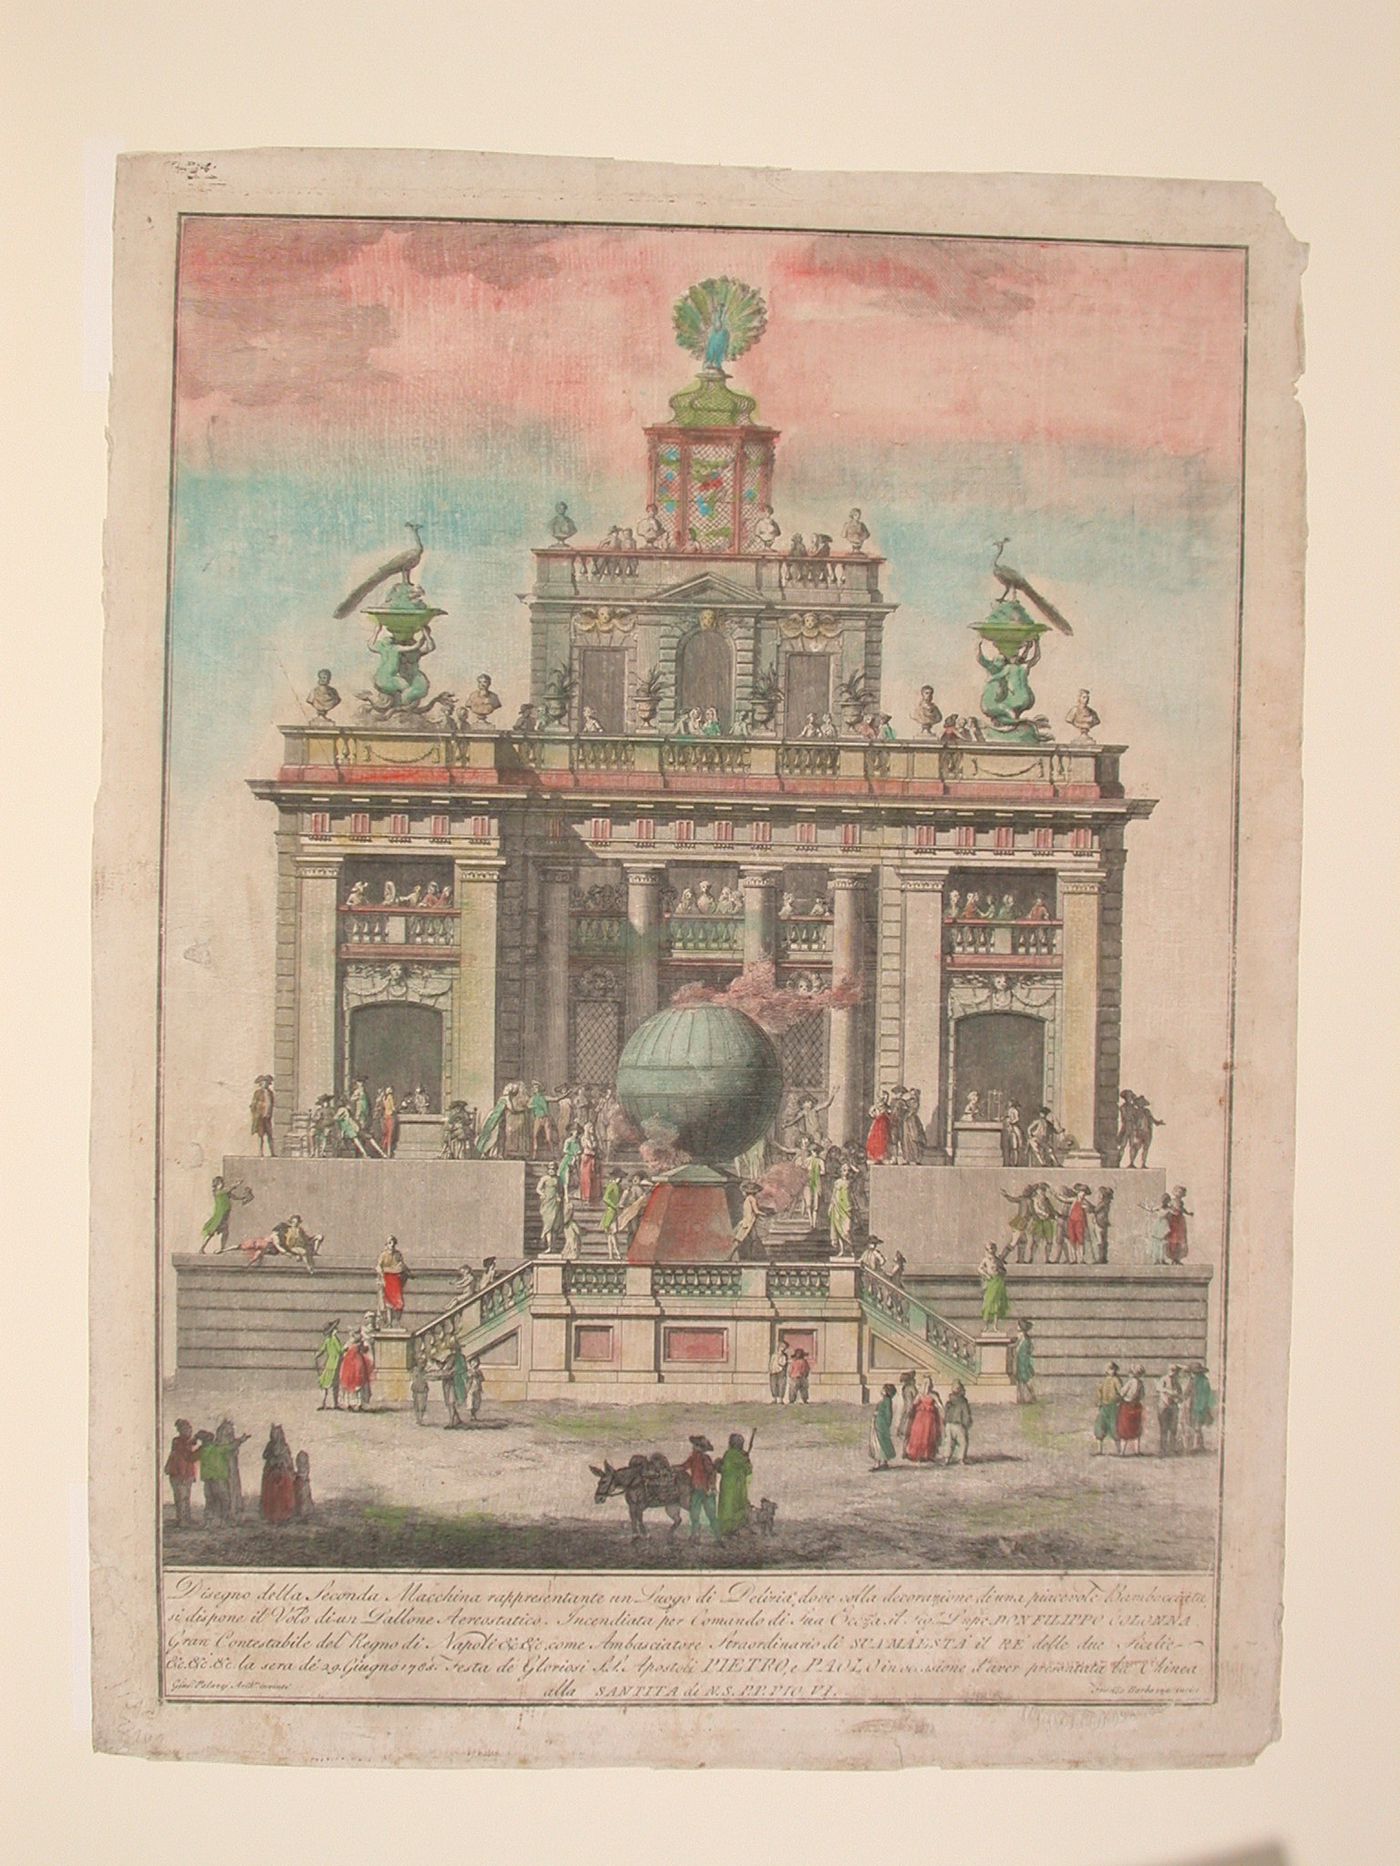 Etching of Palazzi's design for the "seconda macchina" of 1785